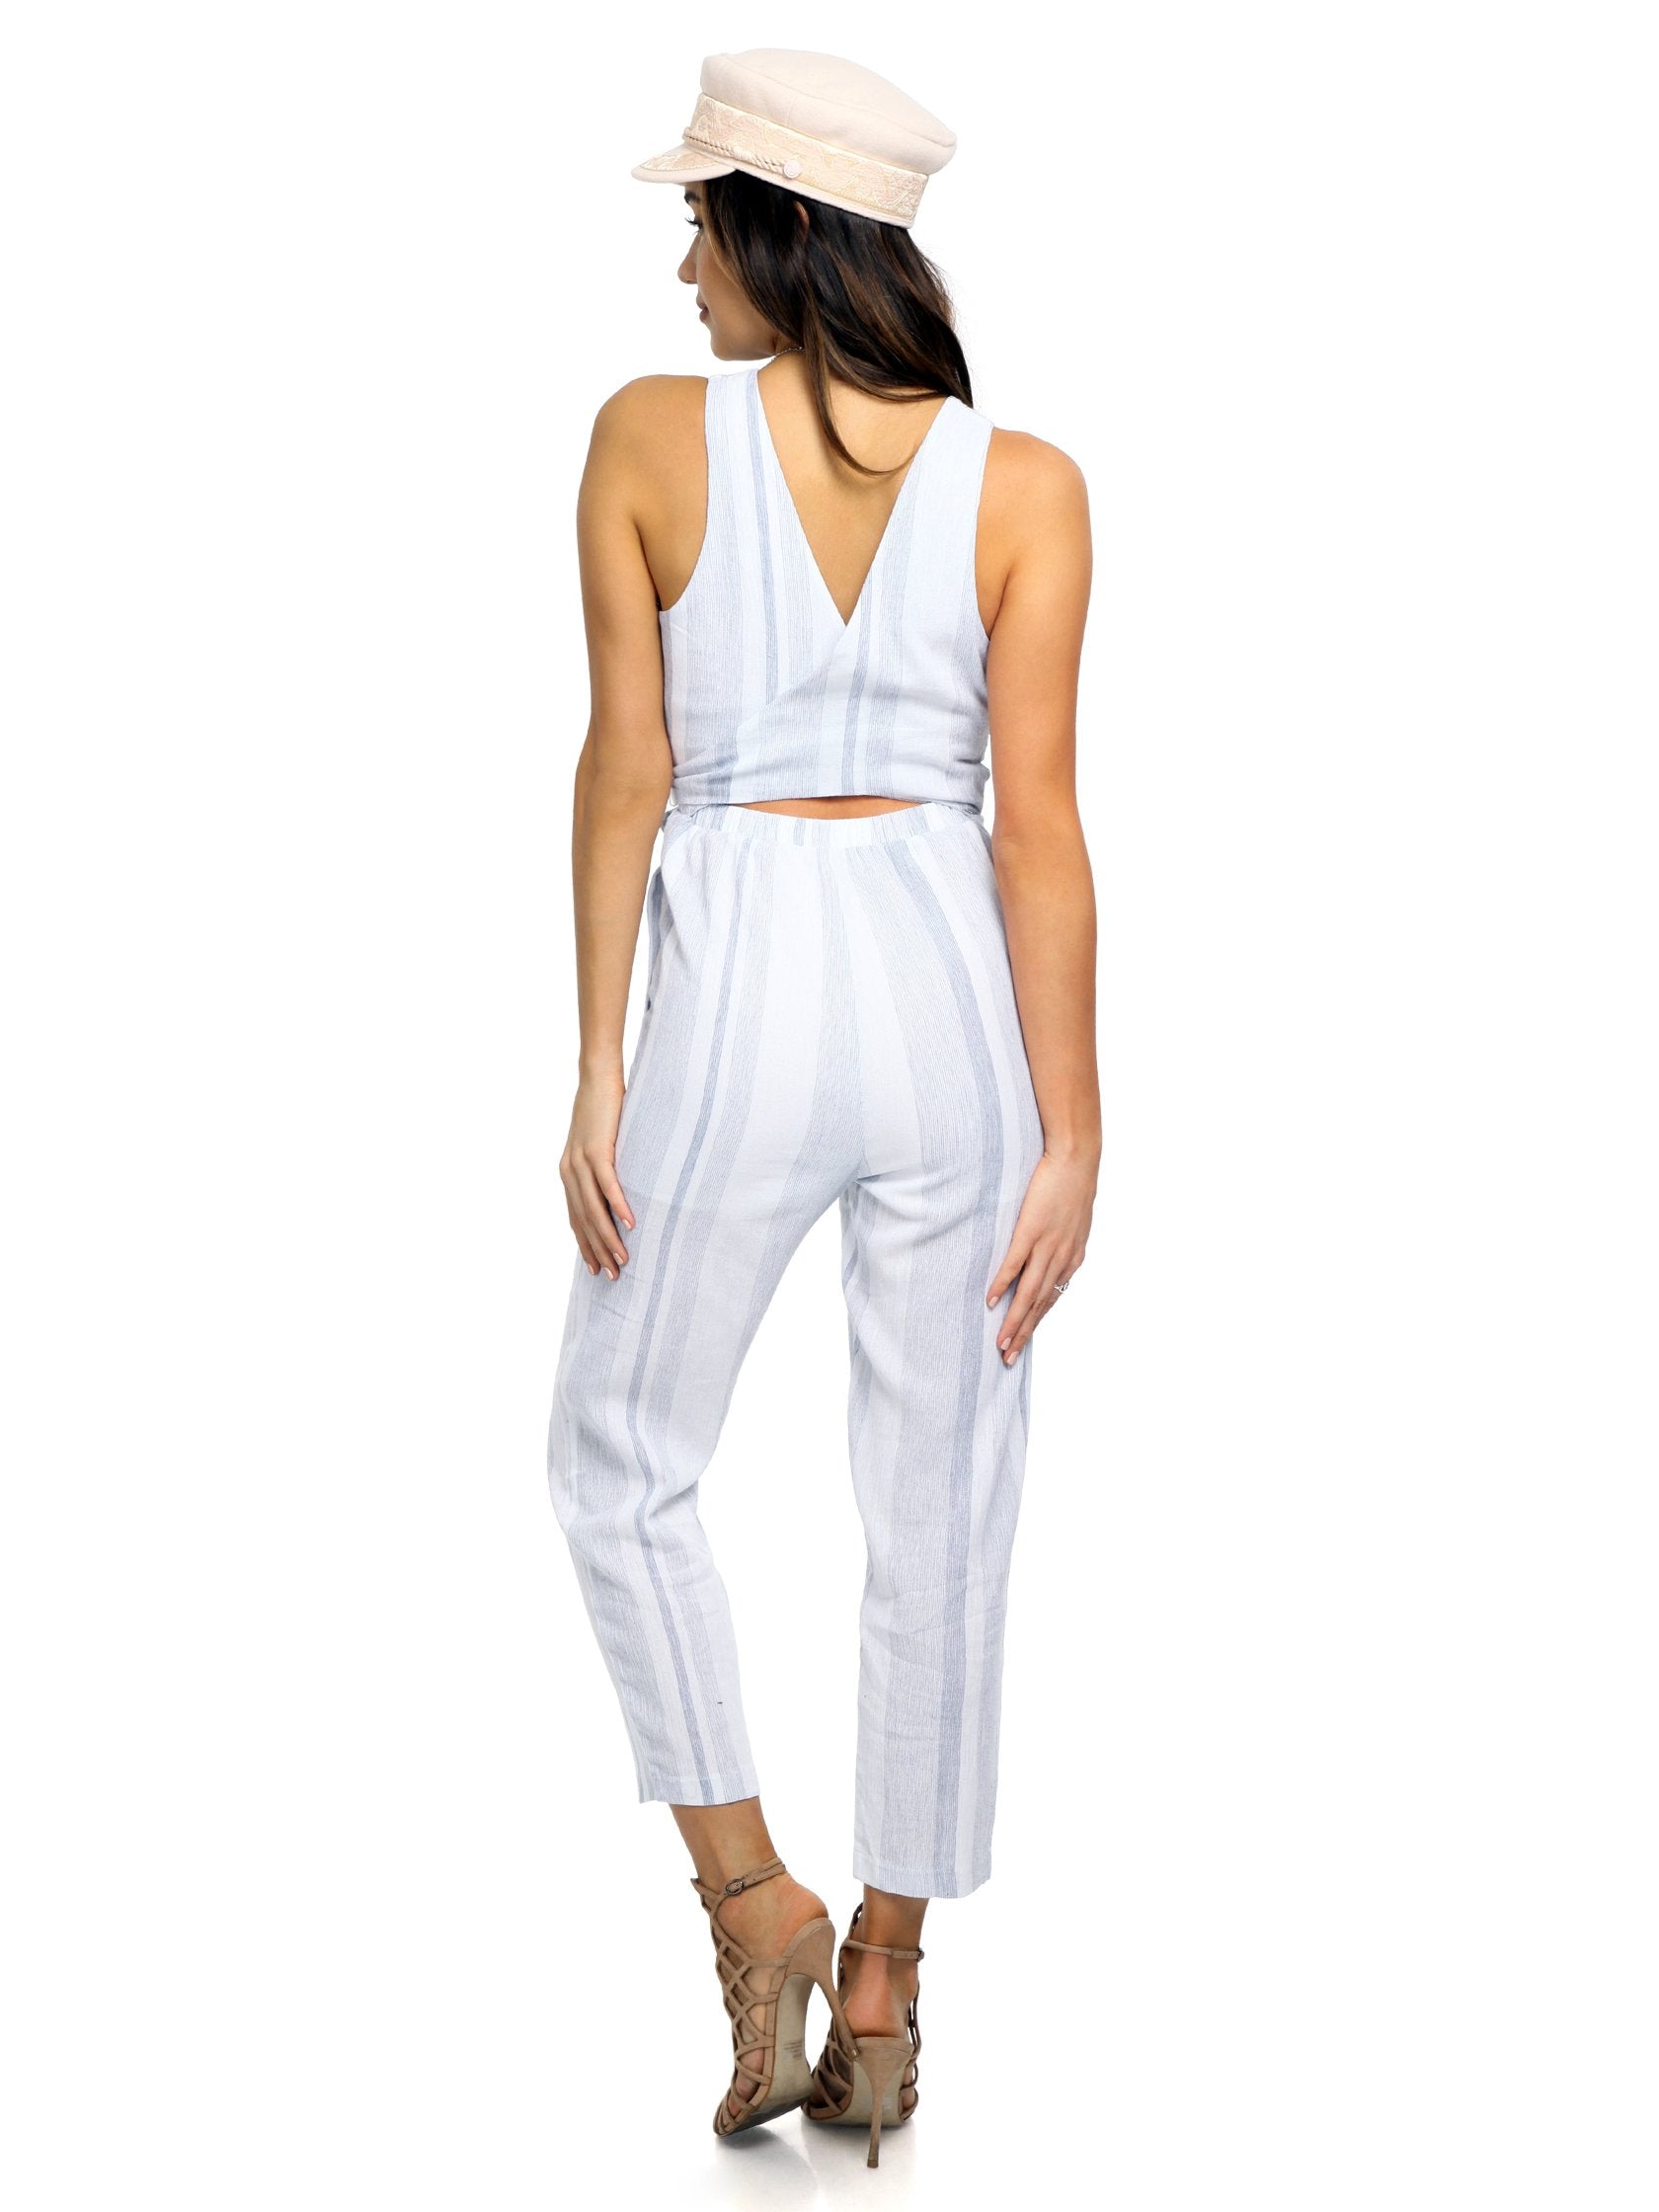 Women wearing a jumpsuit rental from ASTR called Presley Jumpsuit